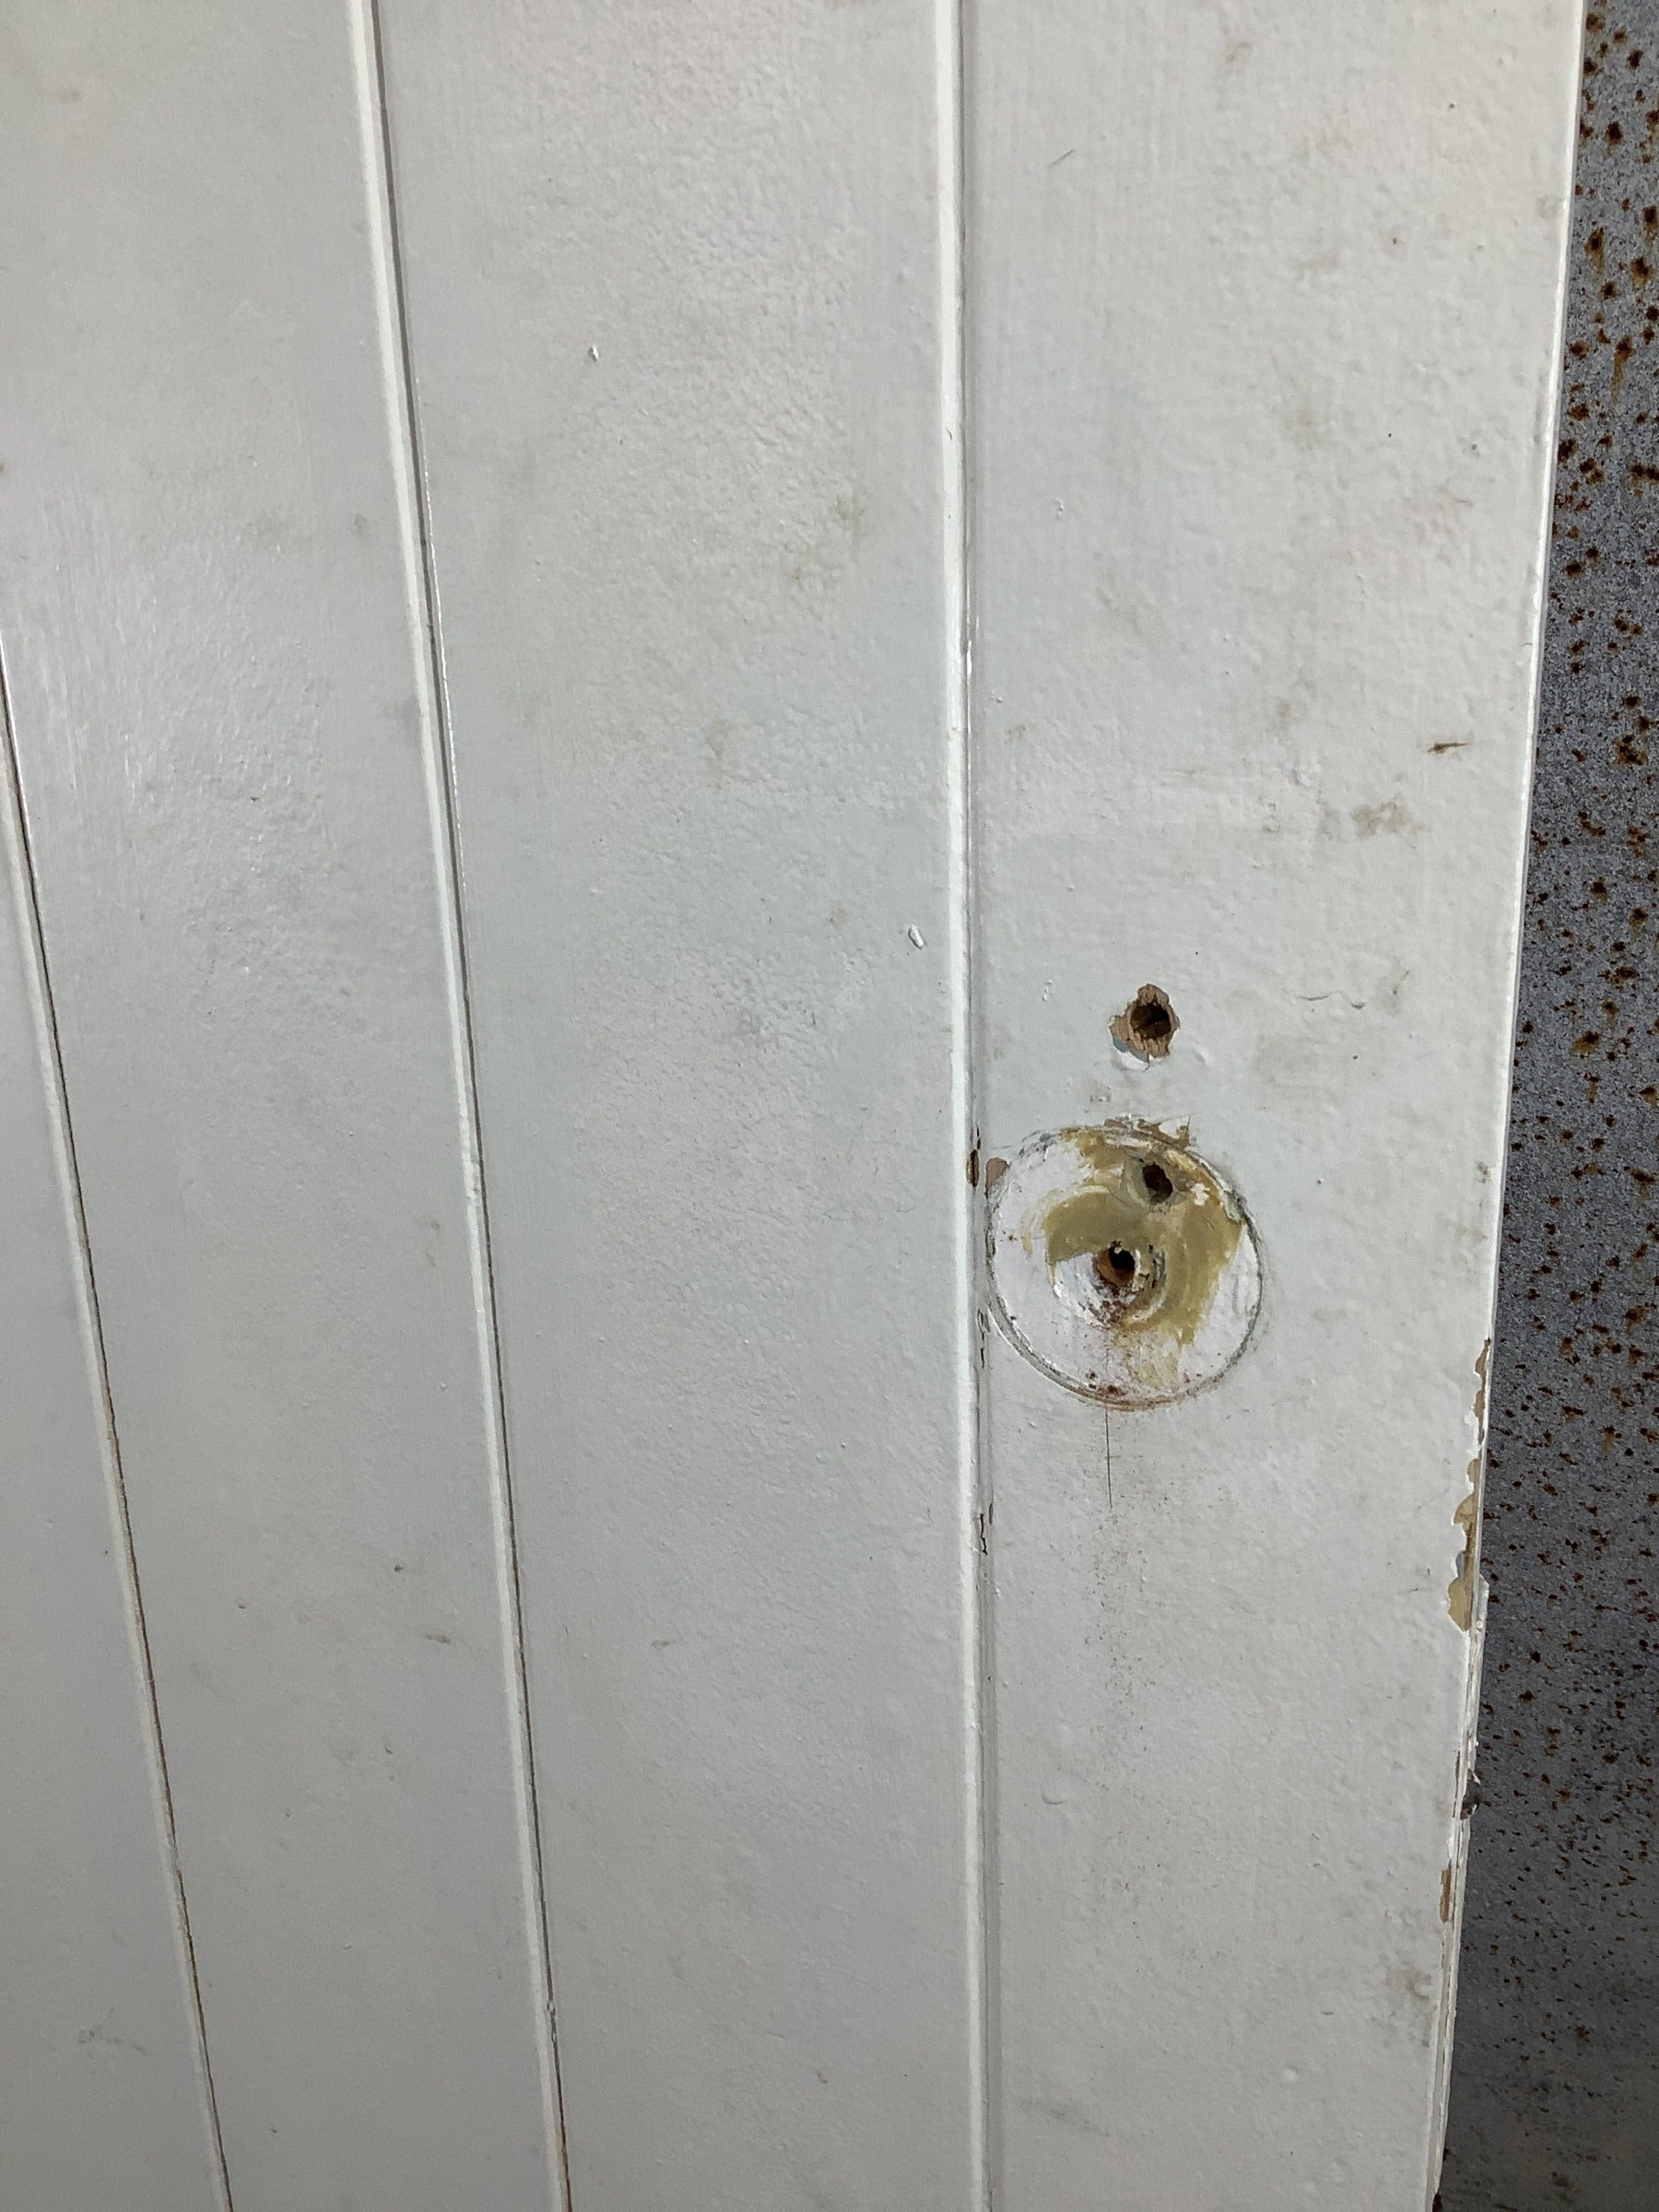 4th Picture showing old screw holes